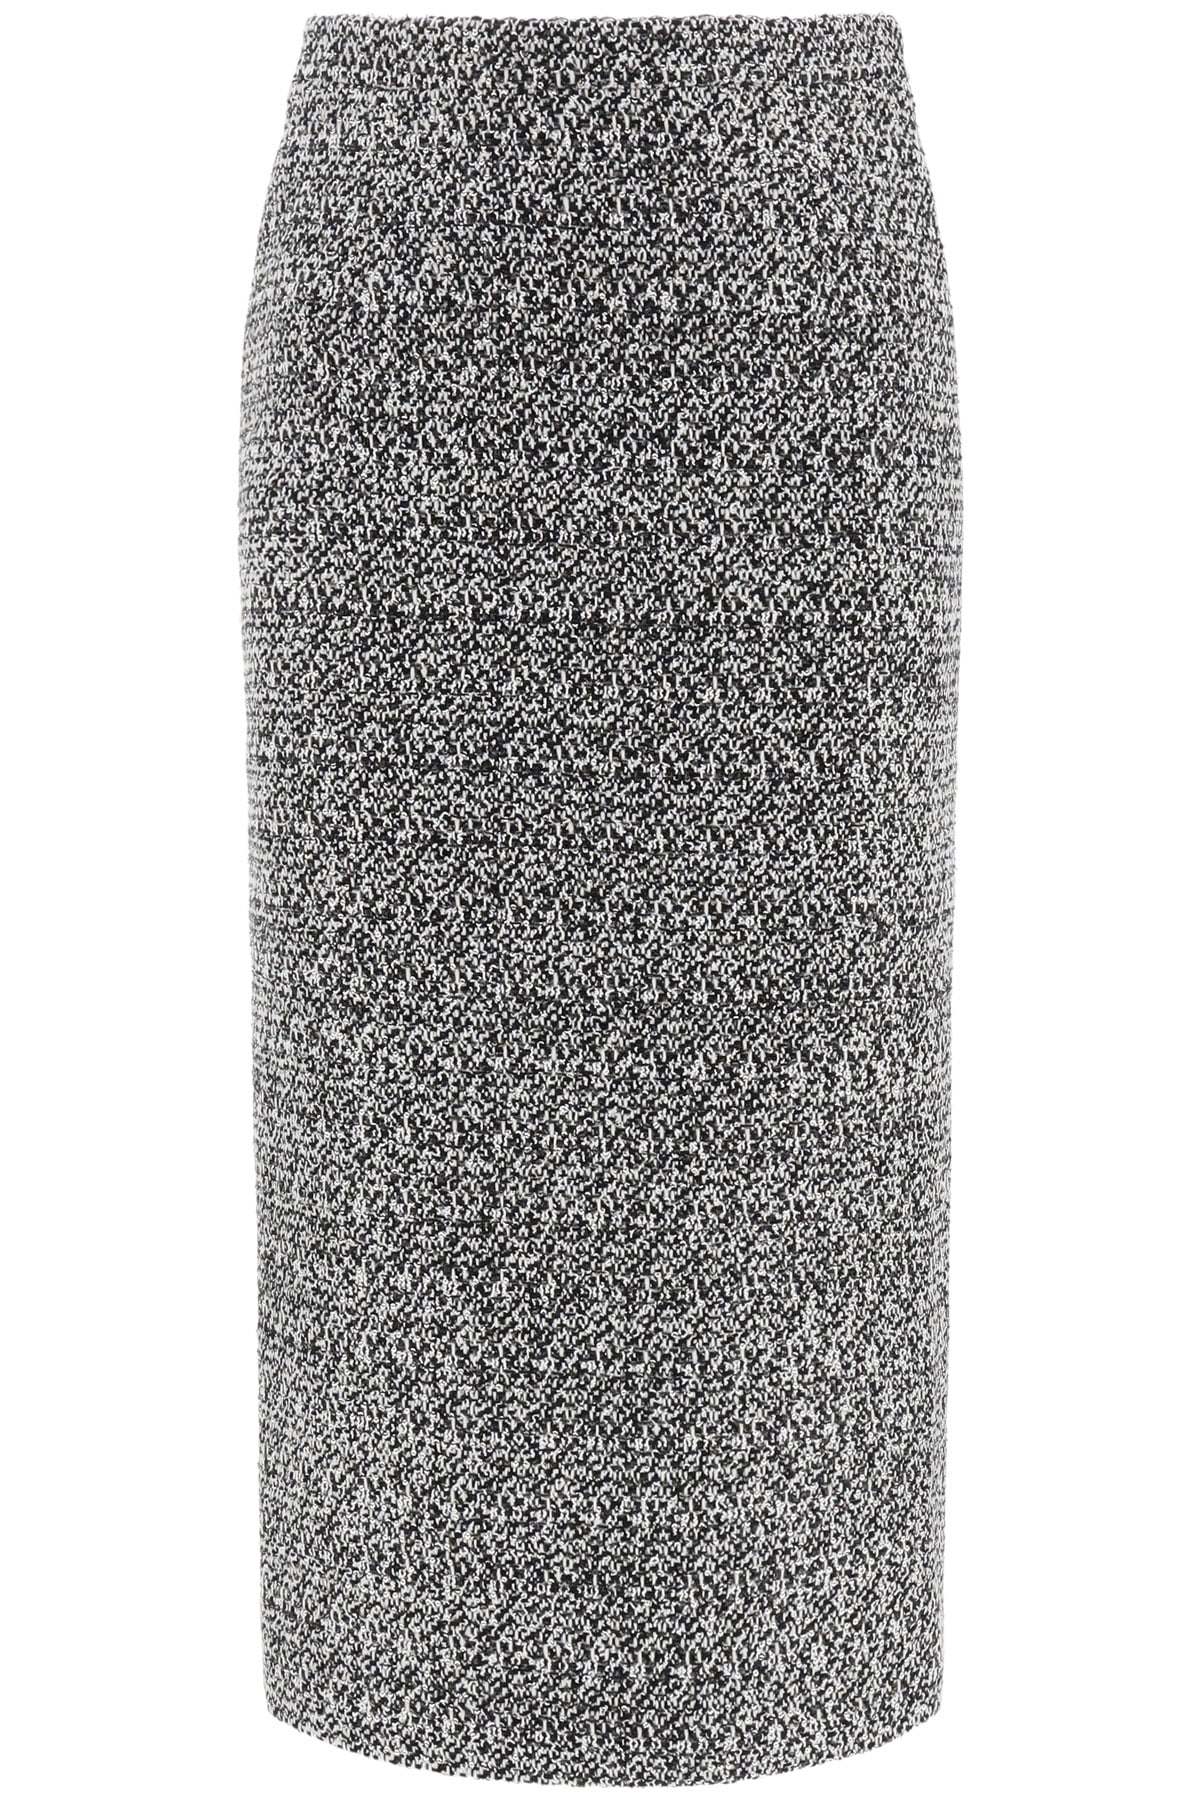 Alessandra Rich Tweed Skirt With Sequins